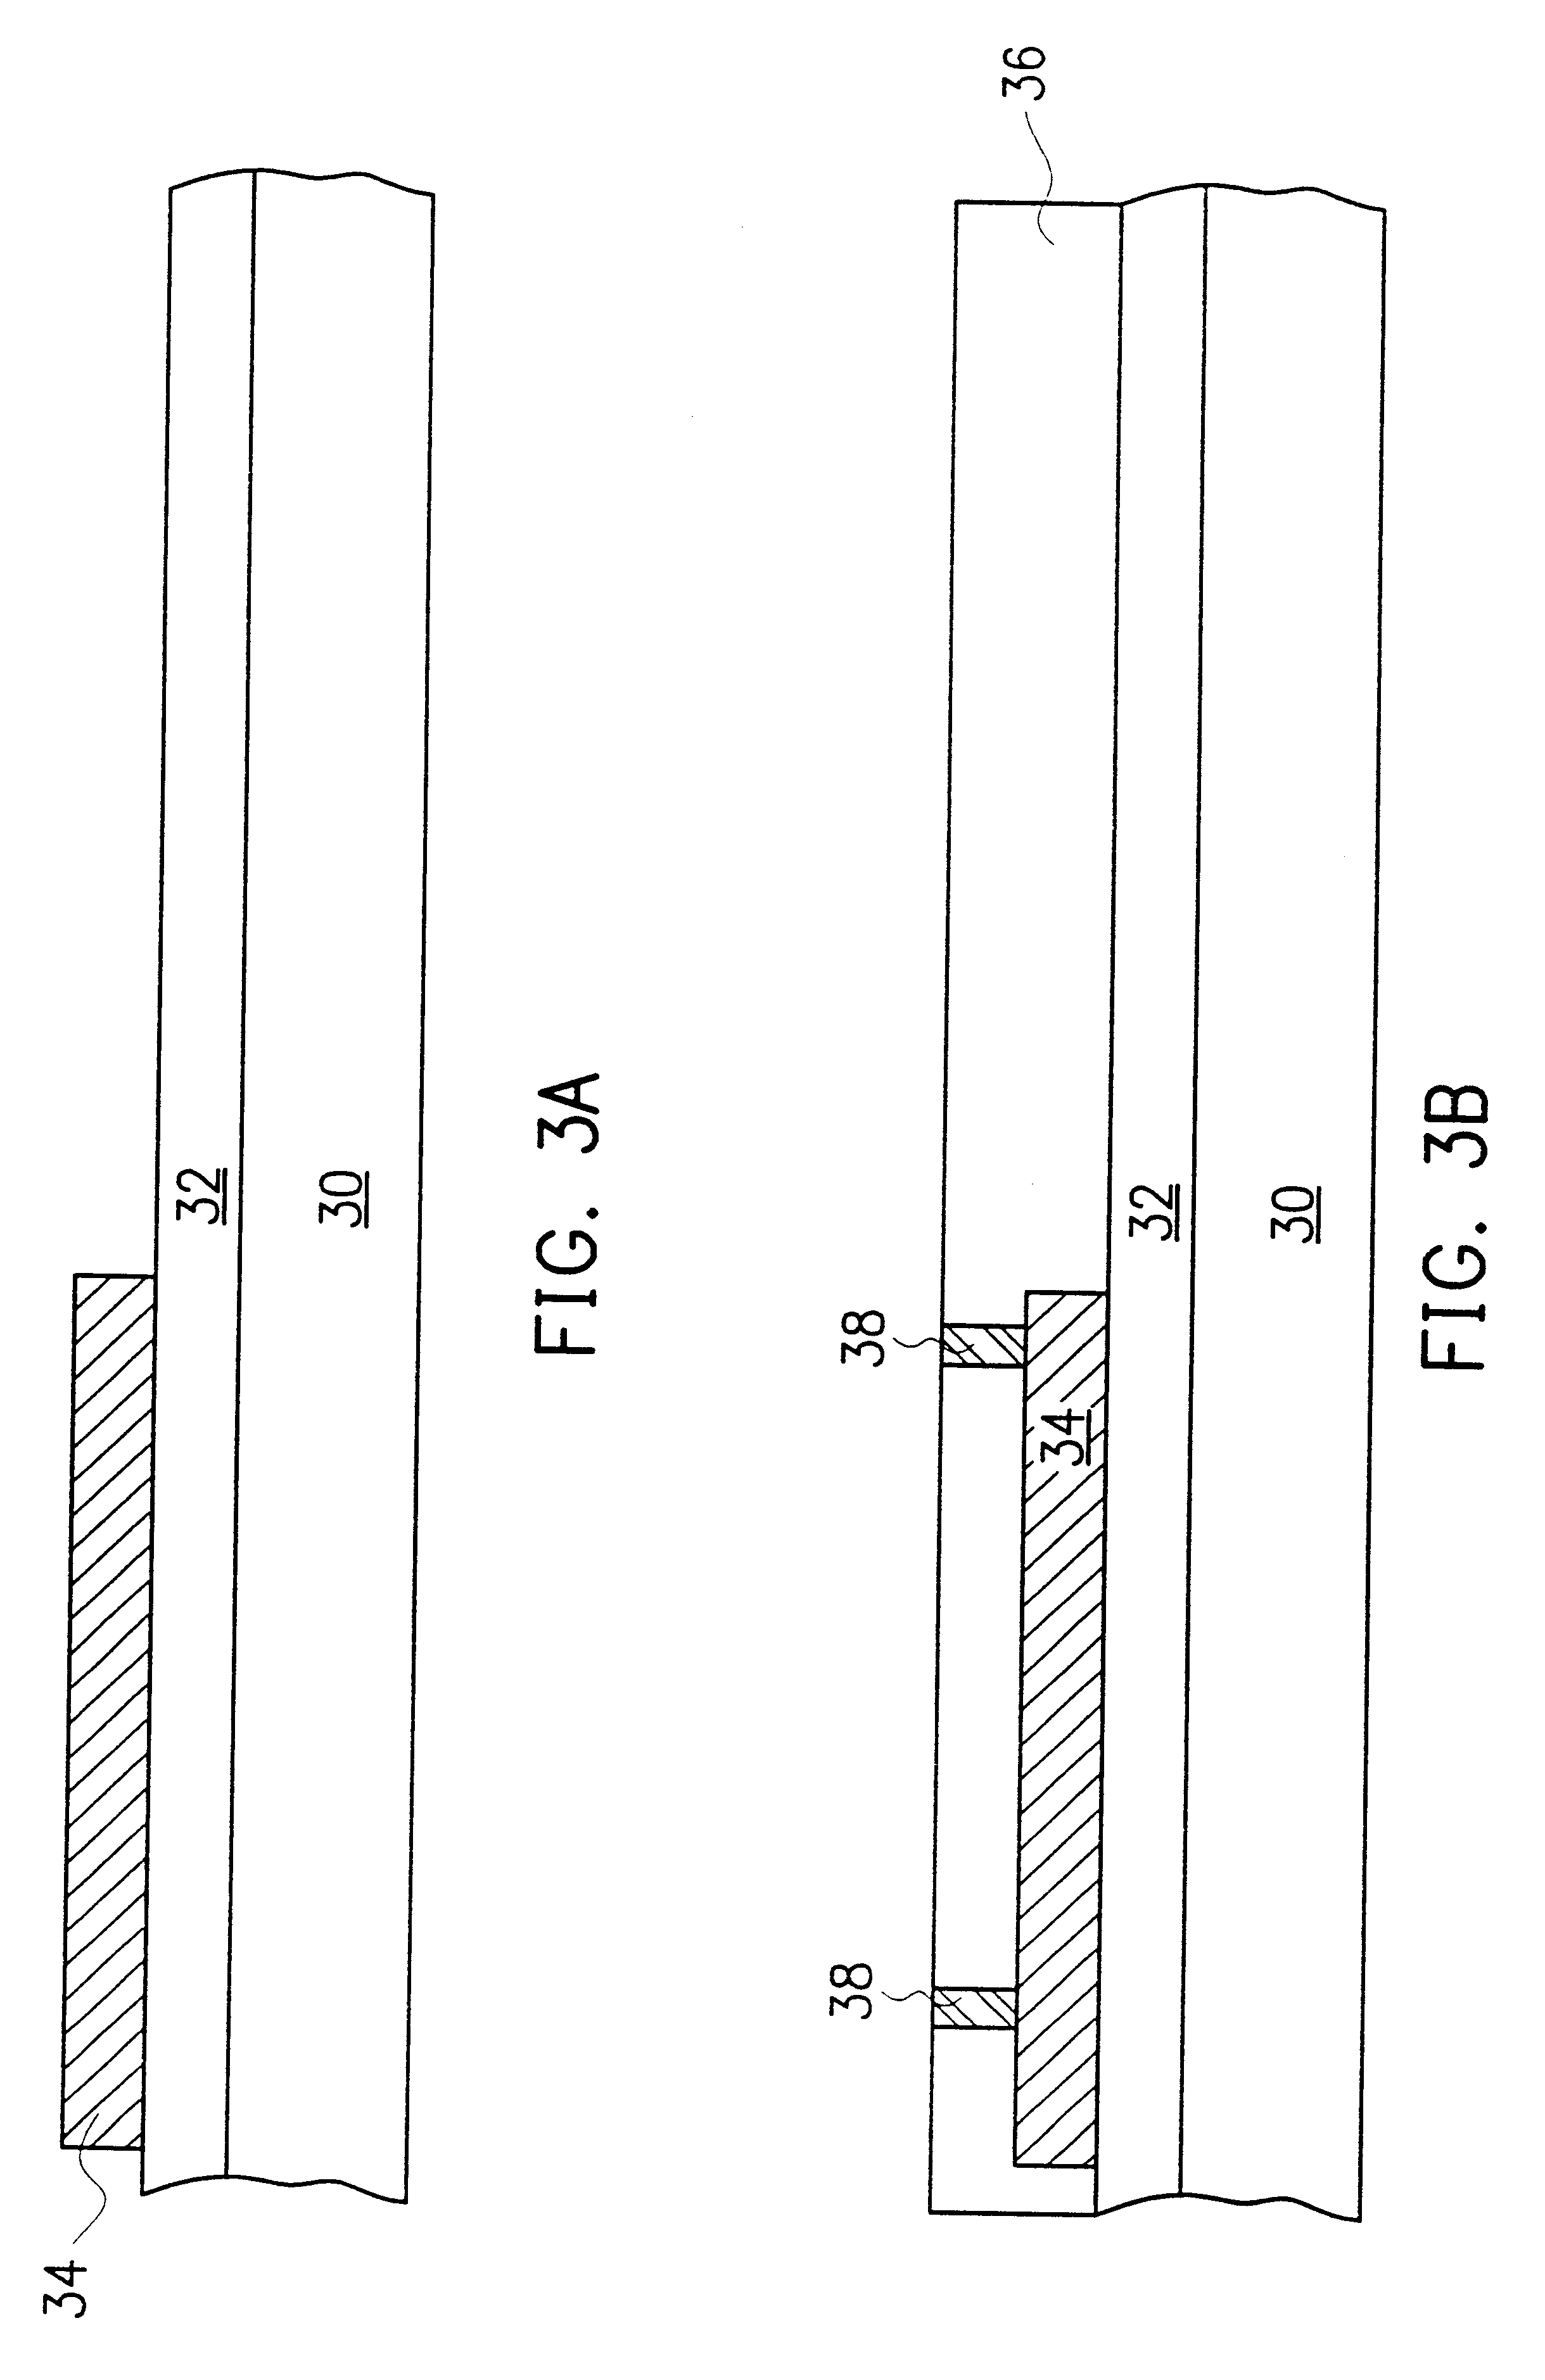 Method and structure of manufacturing a high-Q inductor with an air trench